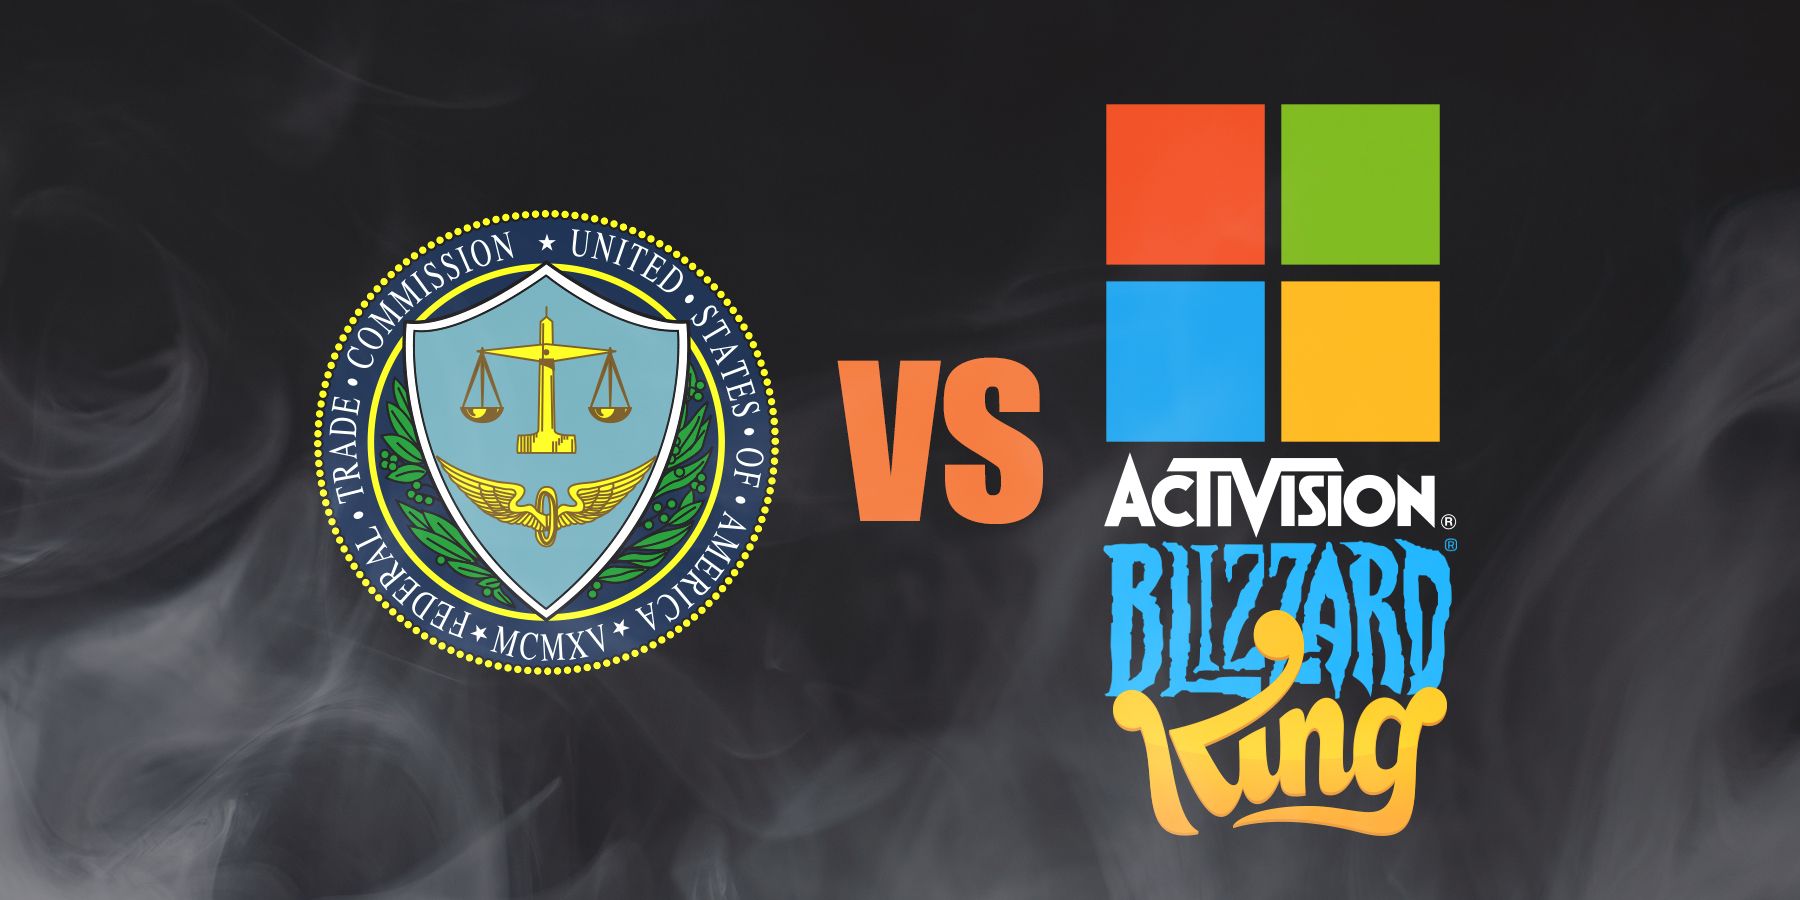 FTC Explains Why It Joined Sony in Opposing Microsoft's Activision